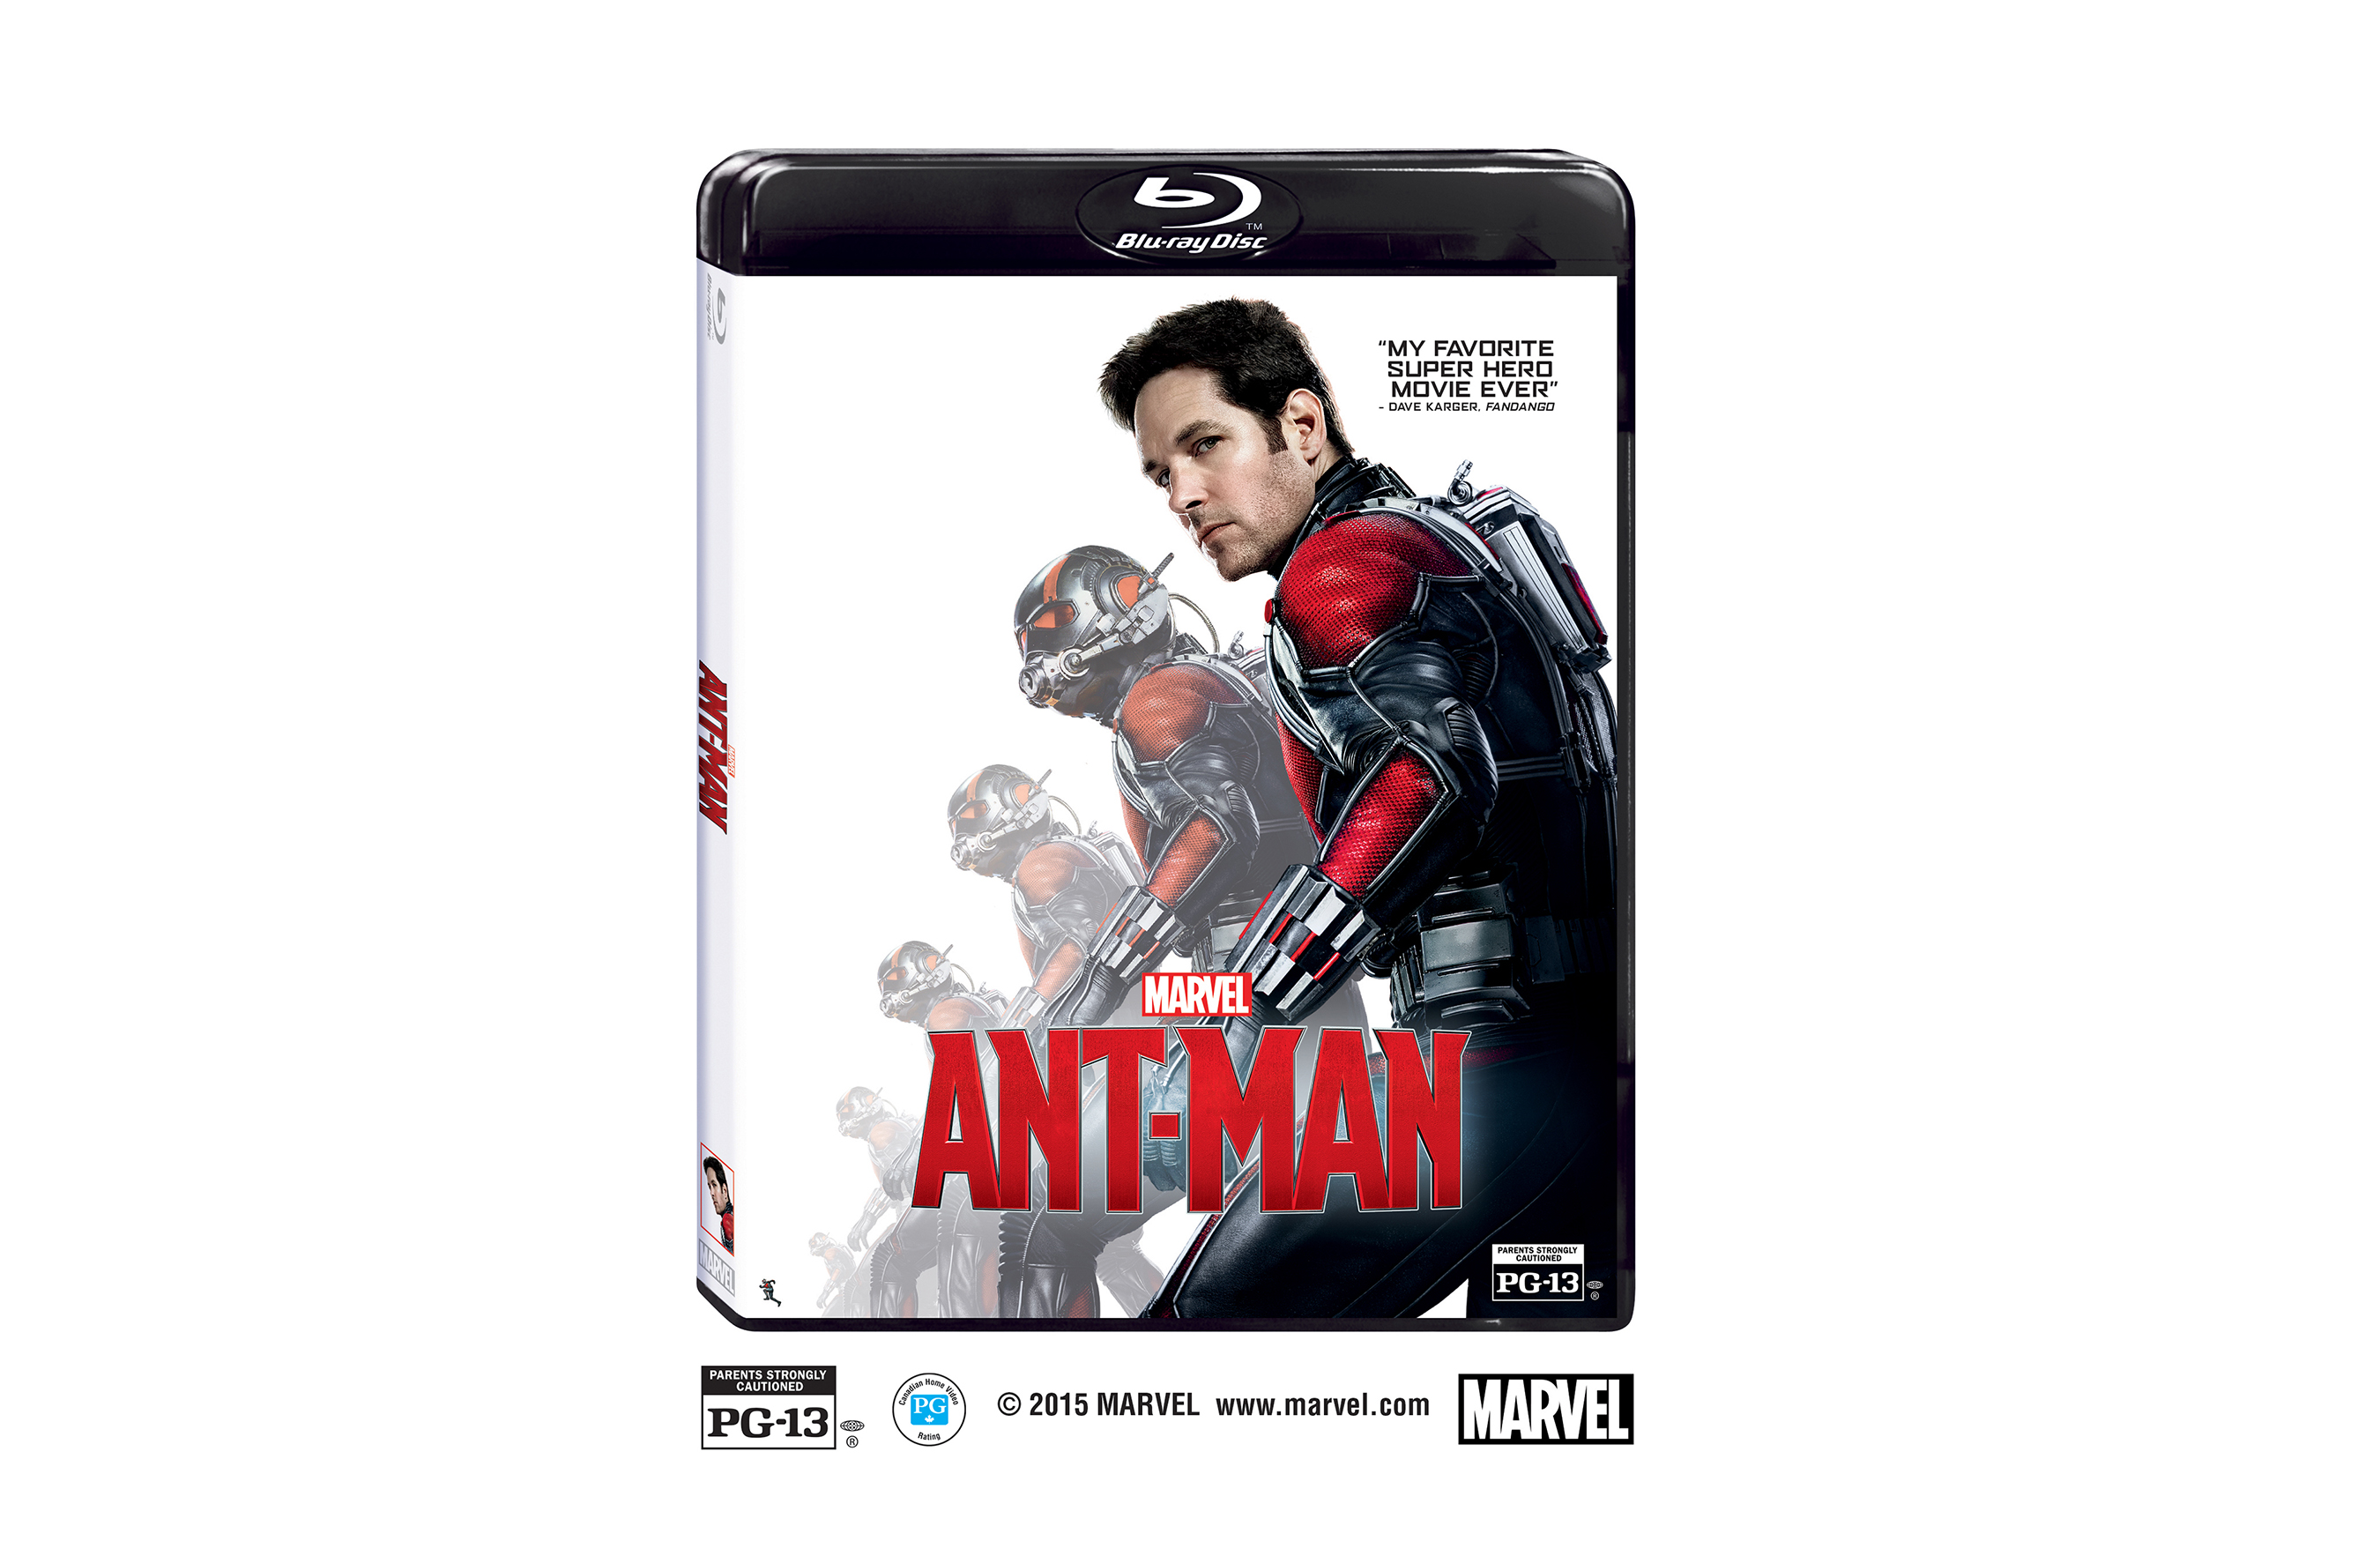 The Perfect Holiday Gift for Movie Fans is Now Available on Digital 3D, Digital HD and Disney Movies Anywhere, and on Blu-ray™ 3D Combo Pack, Blu-ray, DVD, Digital SD and On-Demand December 8, 2015! © 2015 Marvel